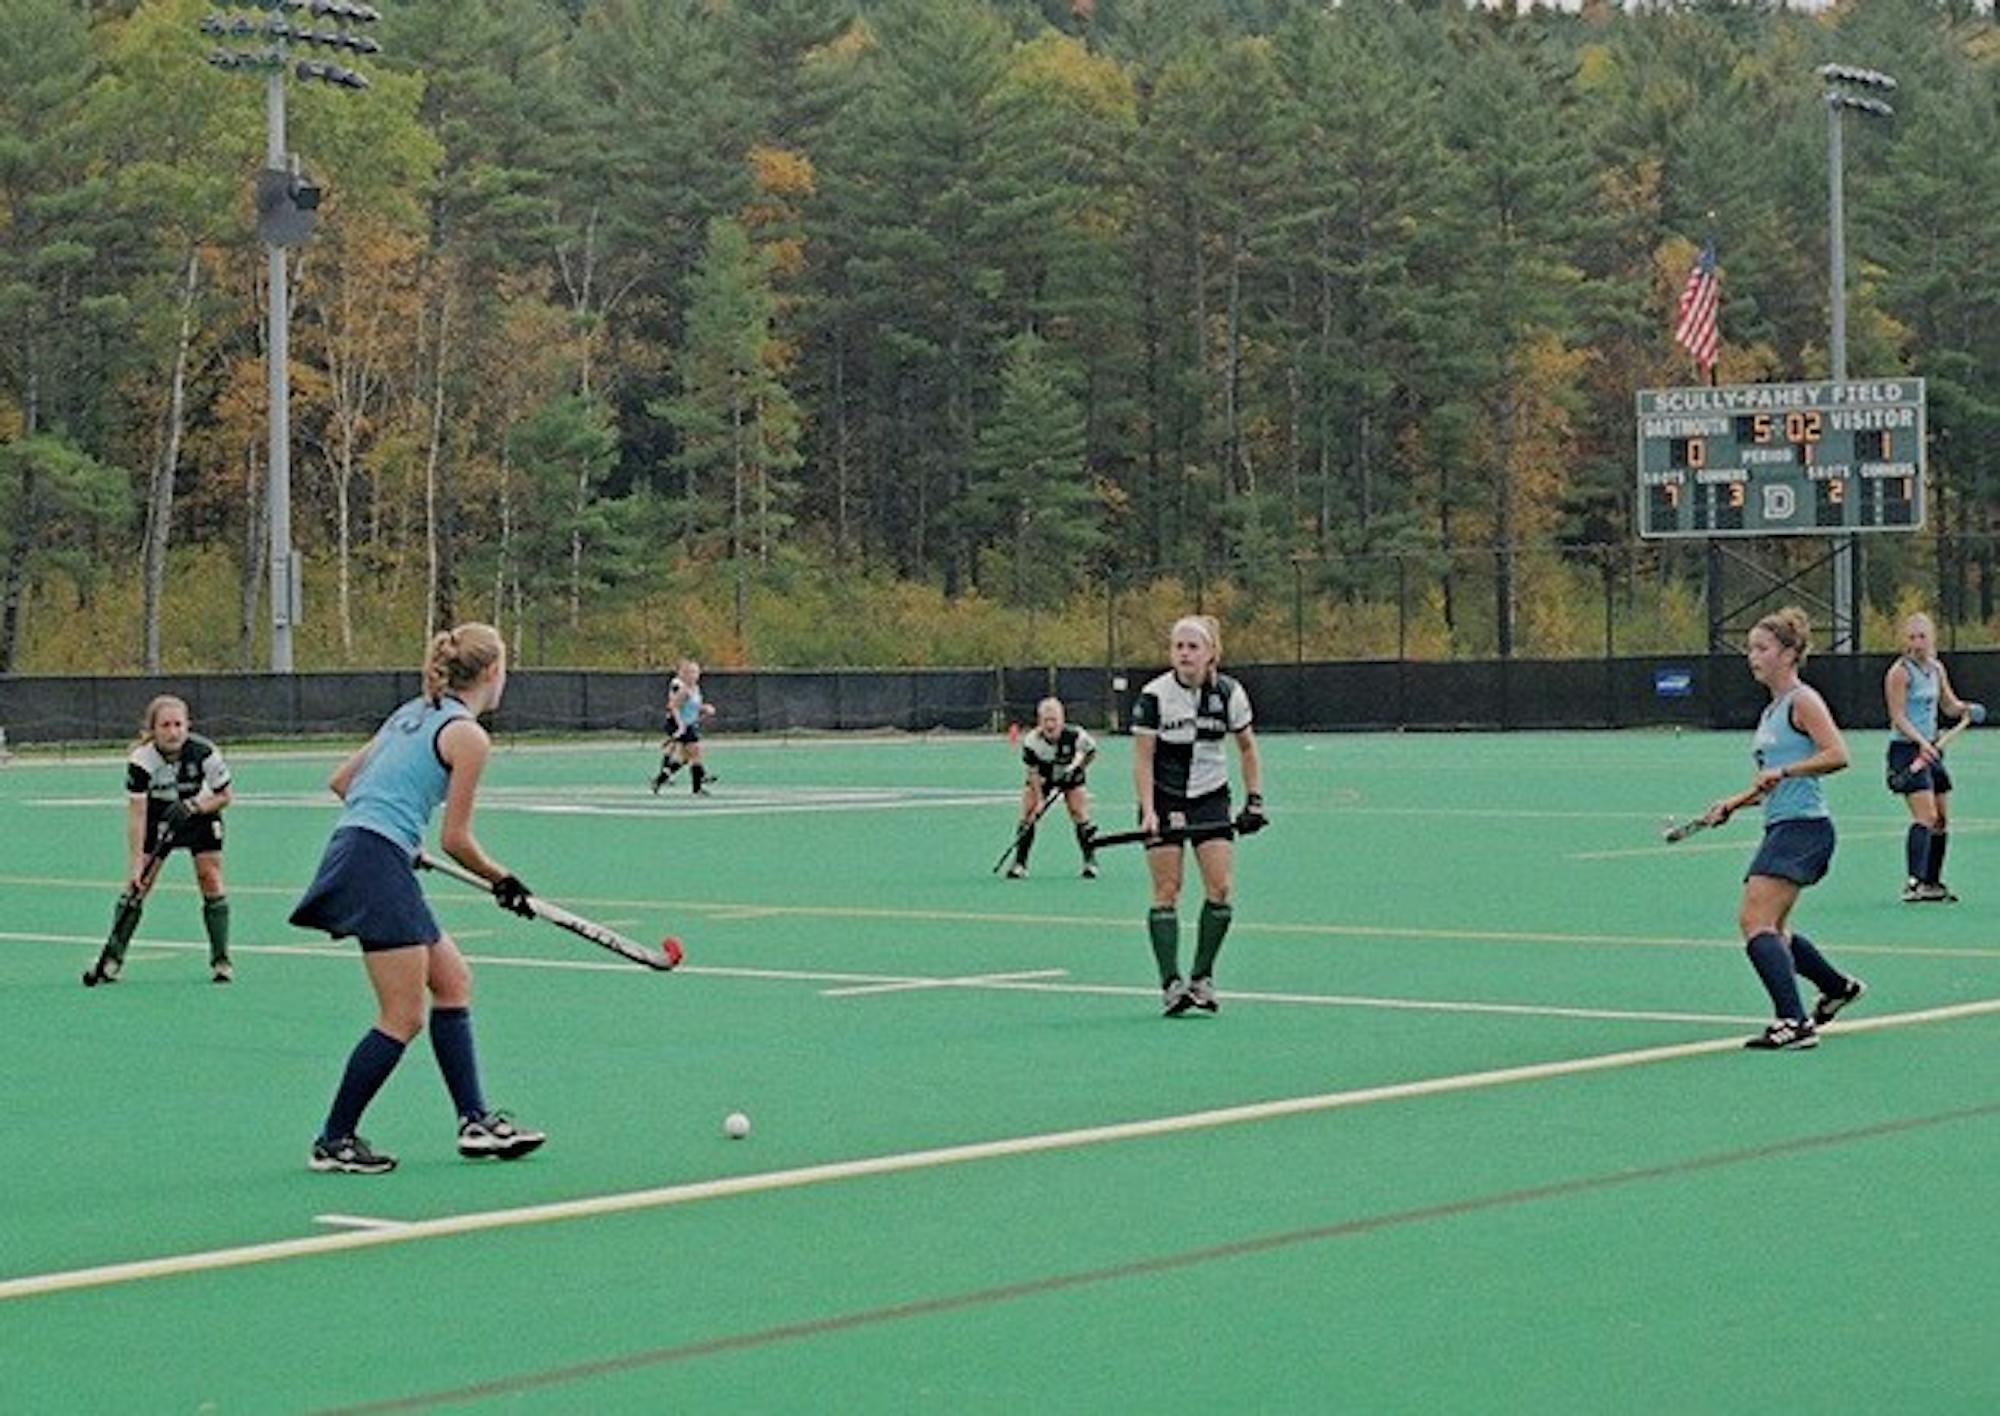 Field hockey has dropped eight of its last ten games, and will look to right its ship against UMass on Wednesday.